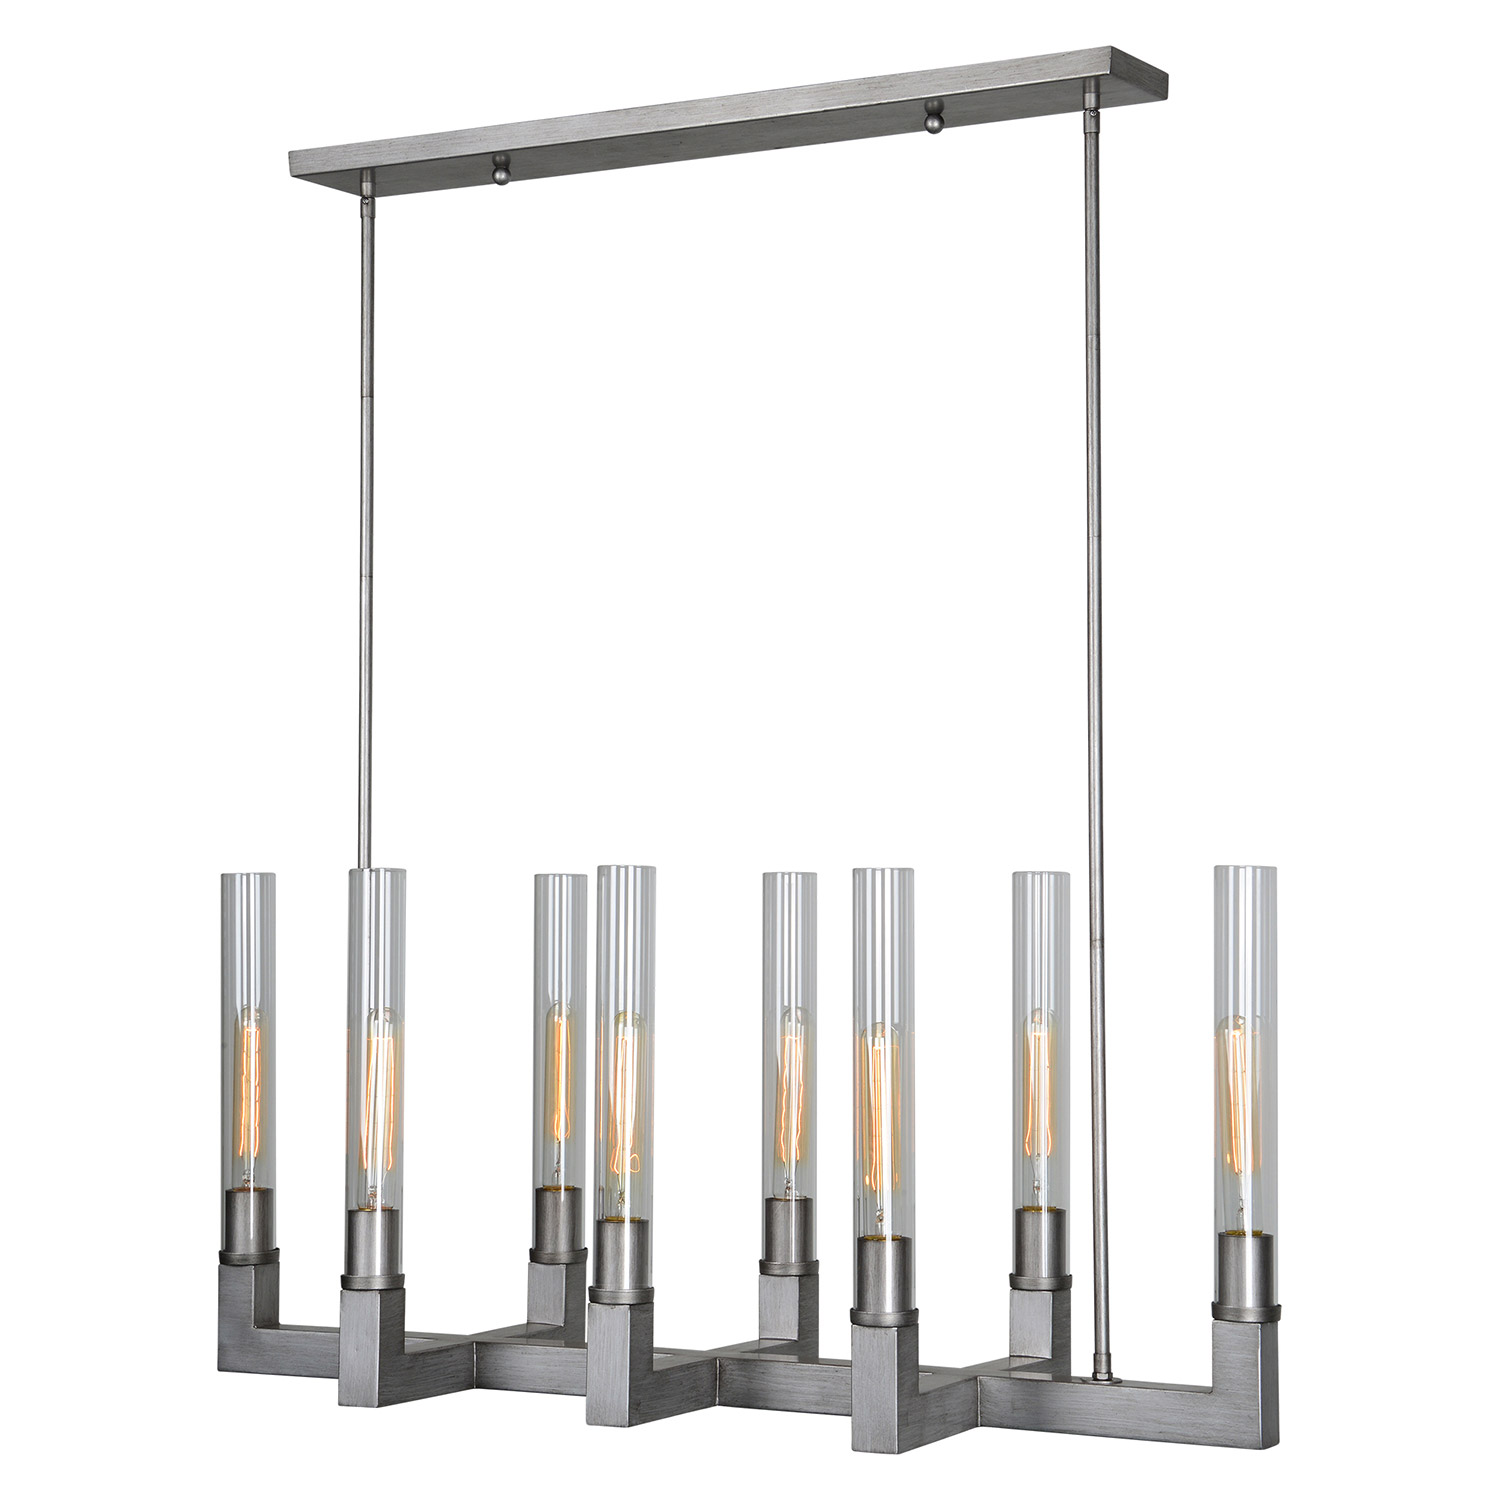 Ren-Wil Grant Ceiling Fixture - Burnished Pewter